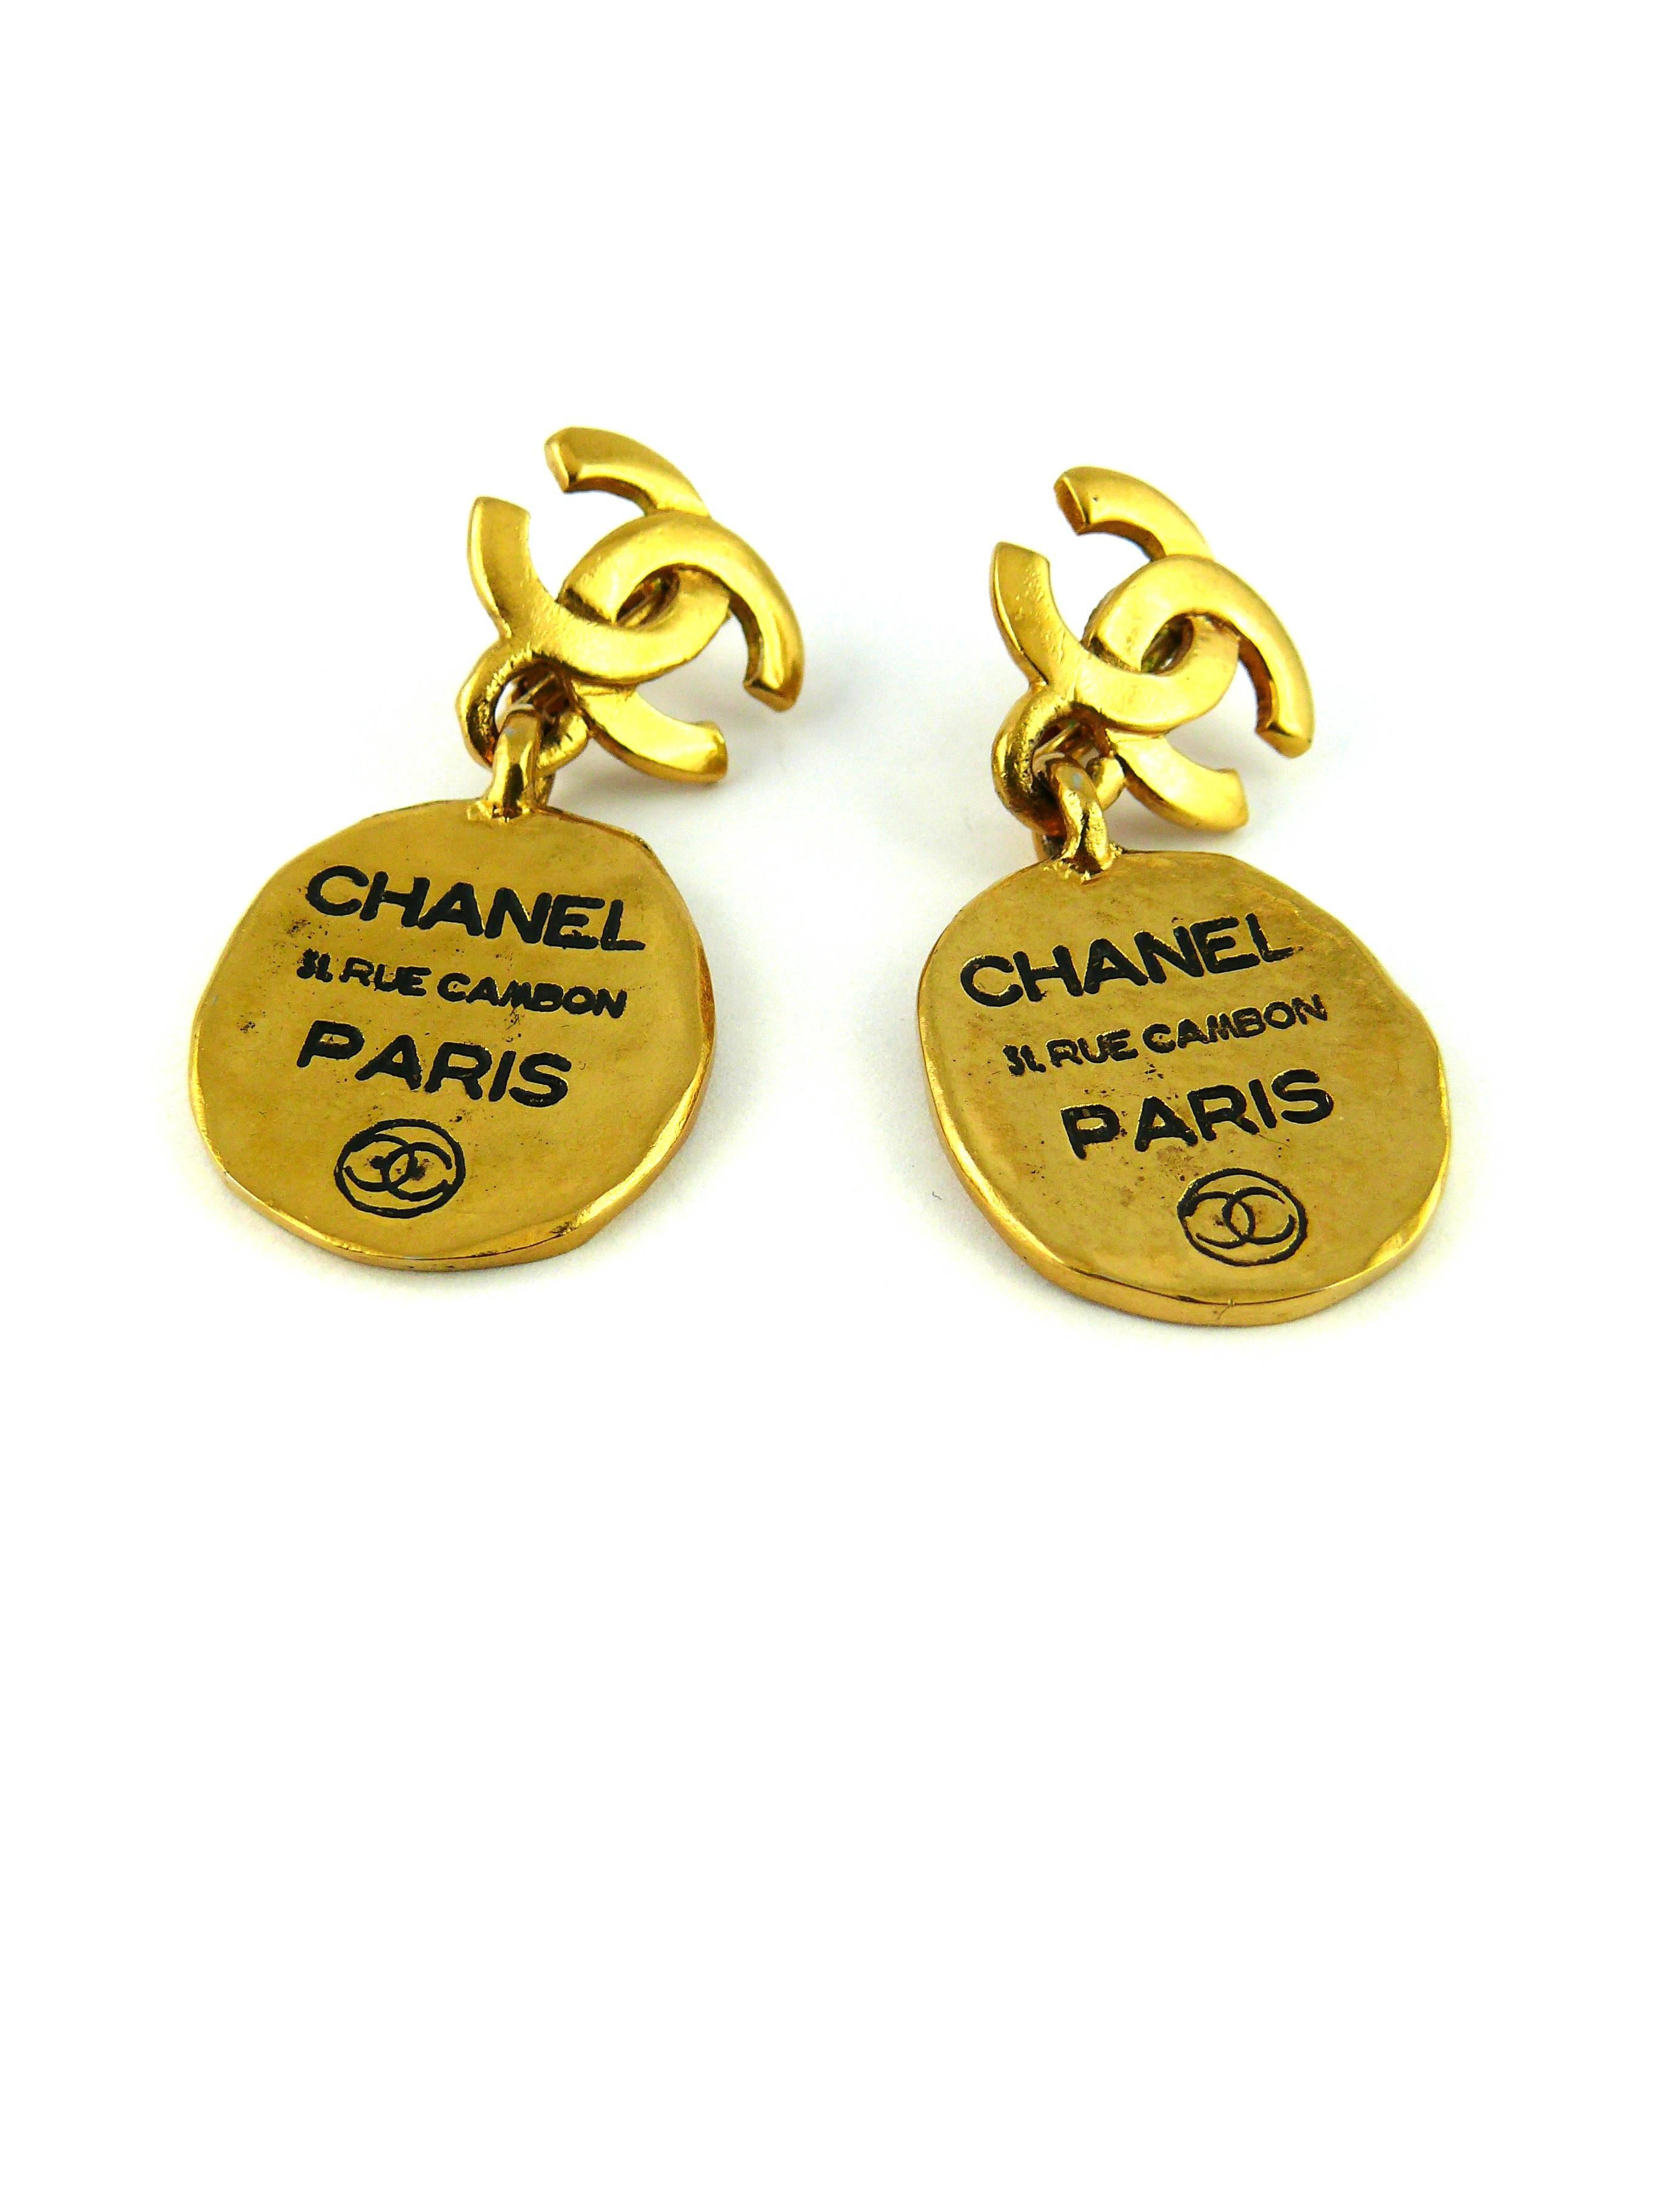 CHANEL vintage gold tone 31 Rue Cambon tag dangling earrings.

Embossed CHANEL on the reverse.

Indicative measurements : length approx. 4.7 cm (1.85 inches) / CC initials 1.8 cm x 1.3 cm (0.71 inches x 0.51 inches) / tag 2.3 cm x 2.6 cm (0.91